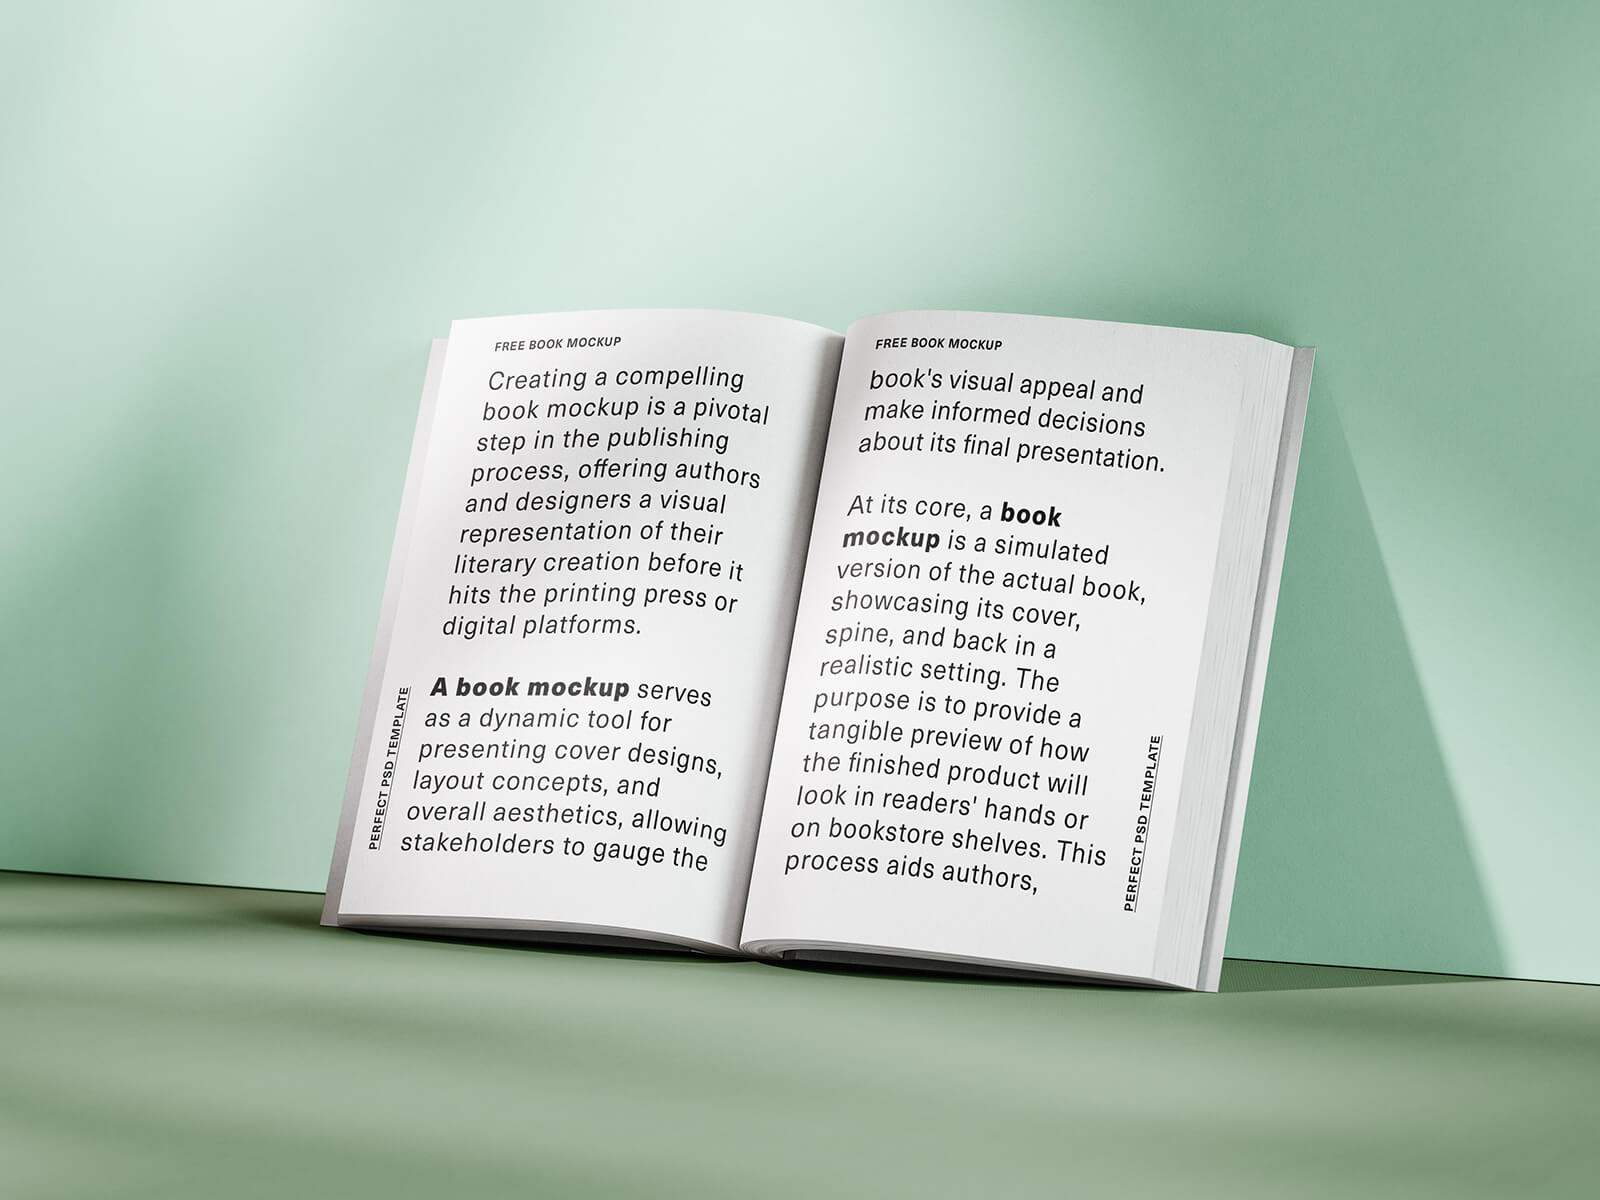 Free Paperback Thick Book Mockup PSD